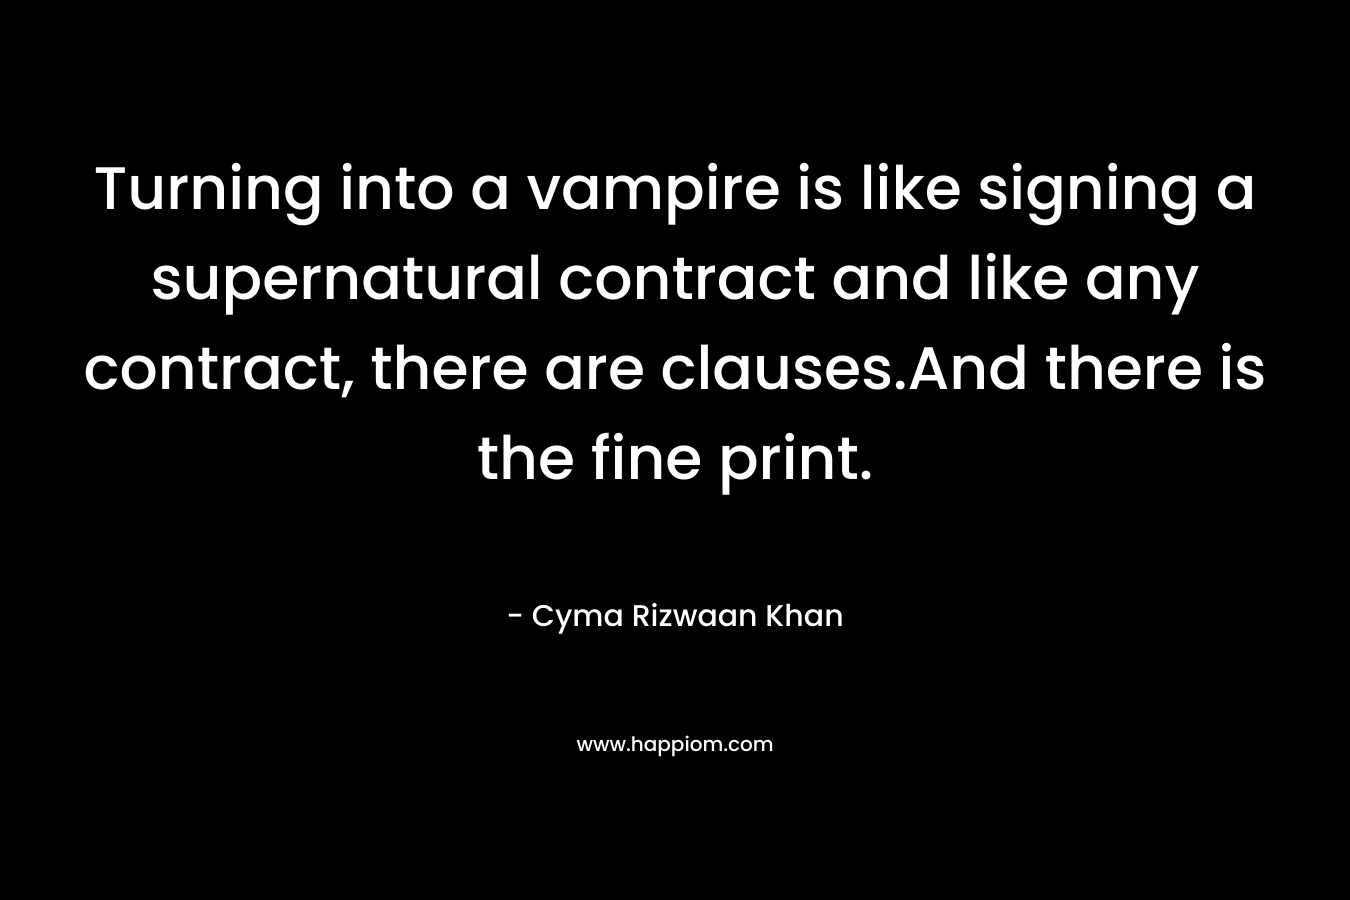 Turning into a vampire is like signing a supernatural contract and like any contract, there are clauses.And there is the fine print. – Cyma Rizwaan Khan